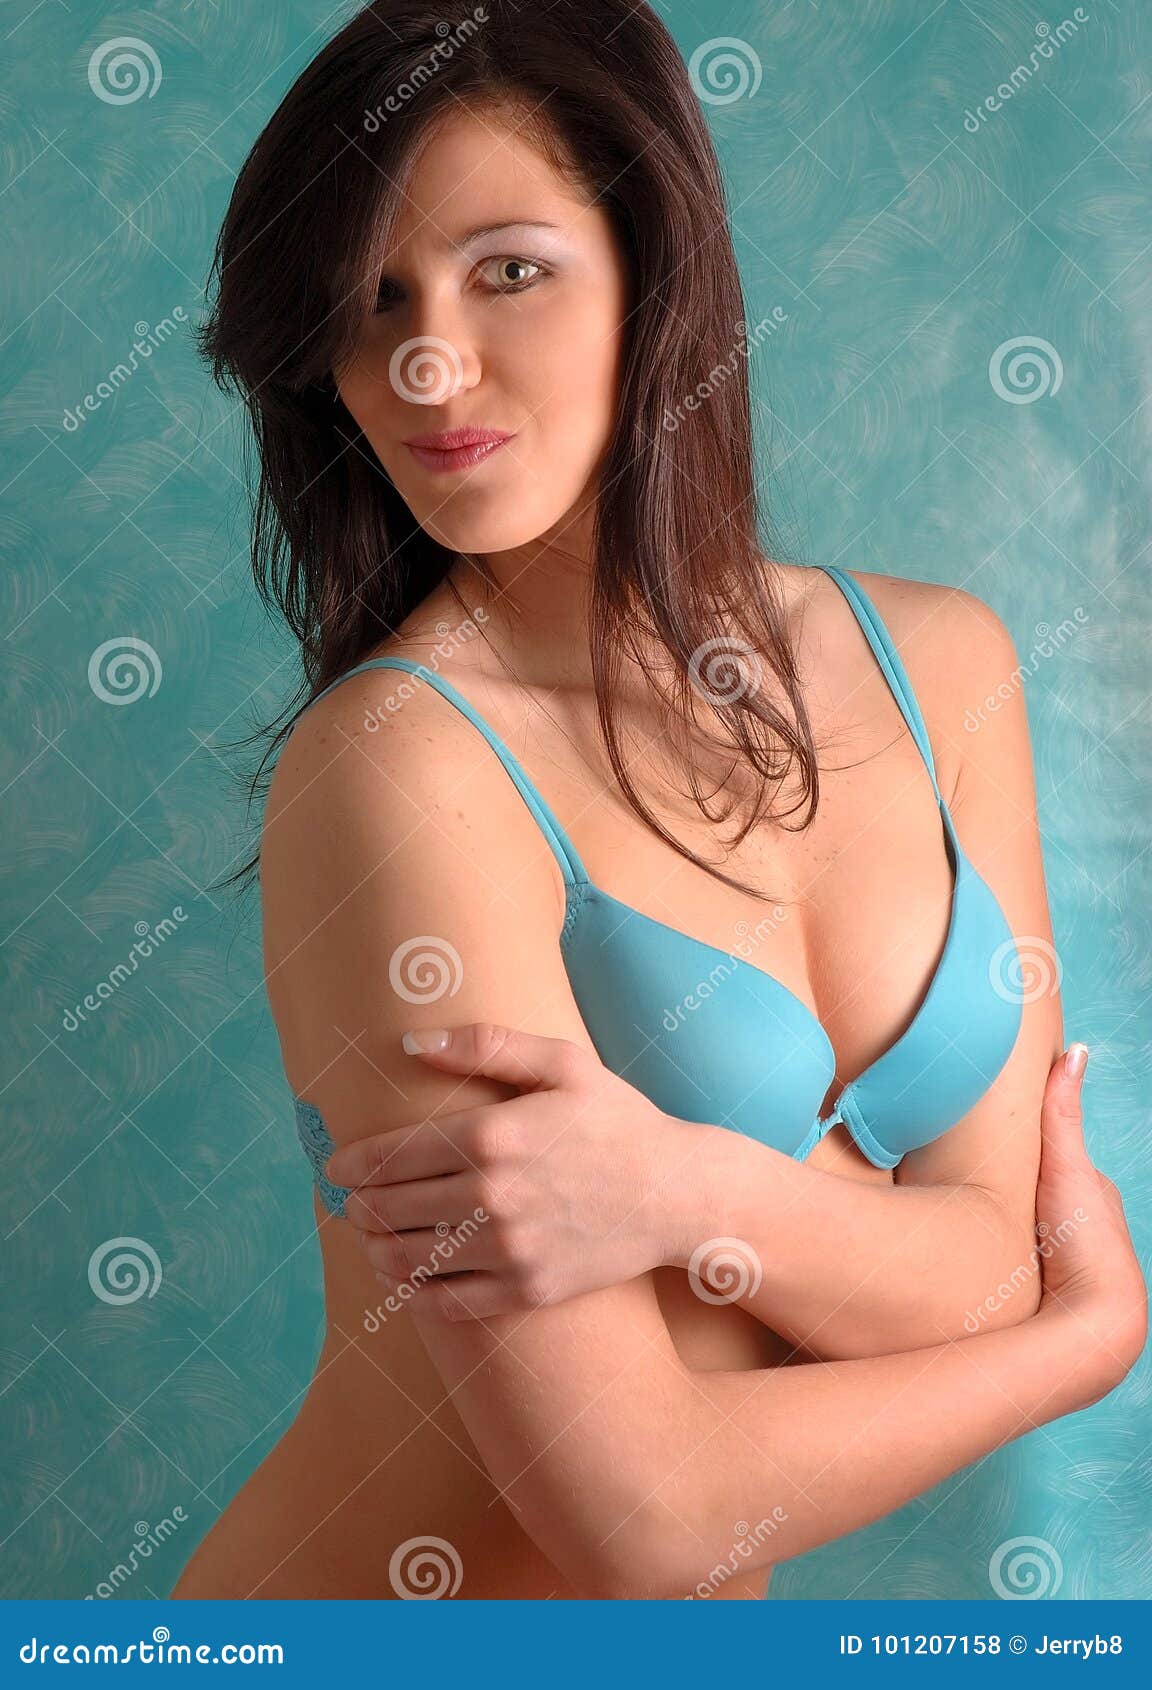 Girl in Blue Bra Revealin Some Cleavage Stock Photo - Image of chest,  revealing: 101207158